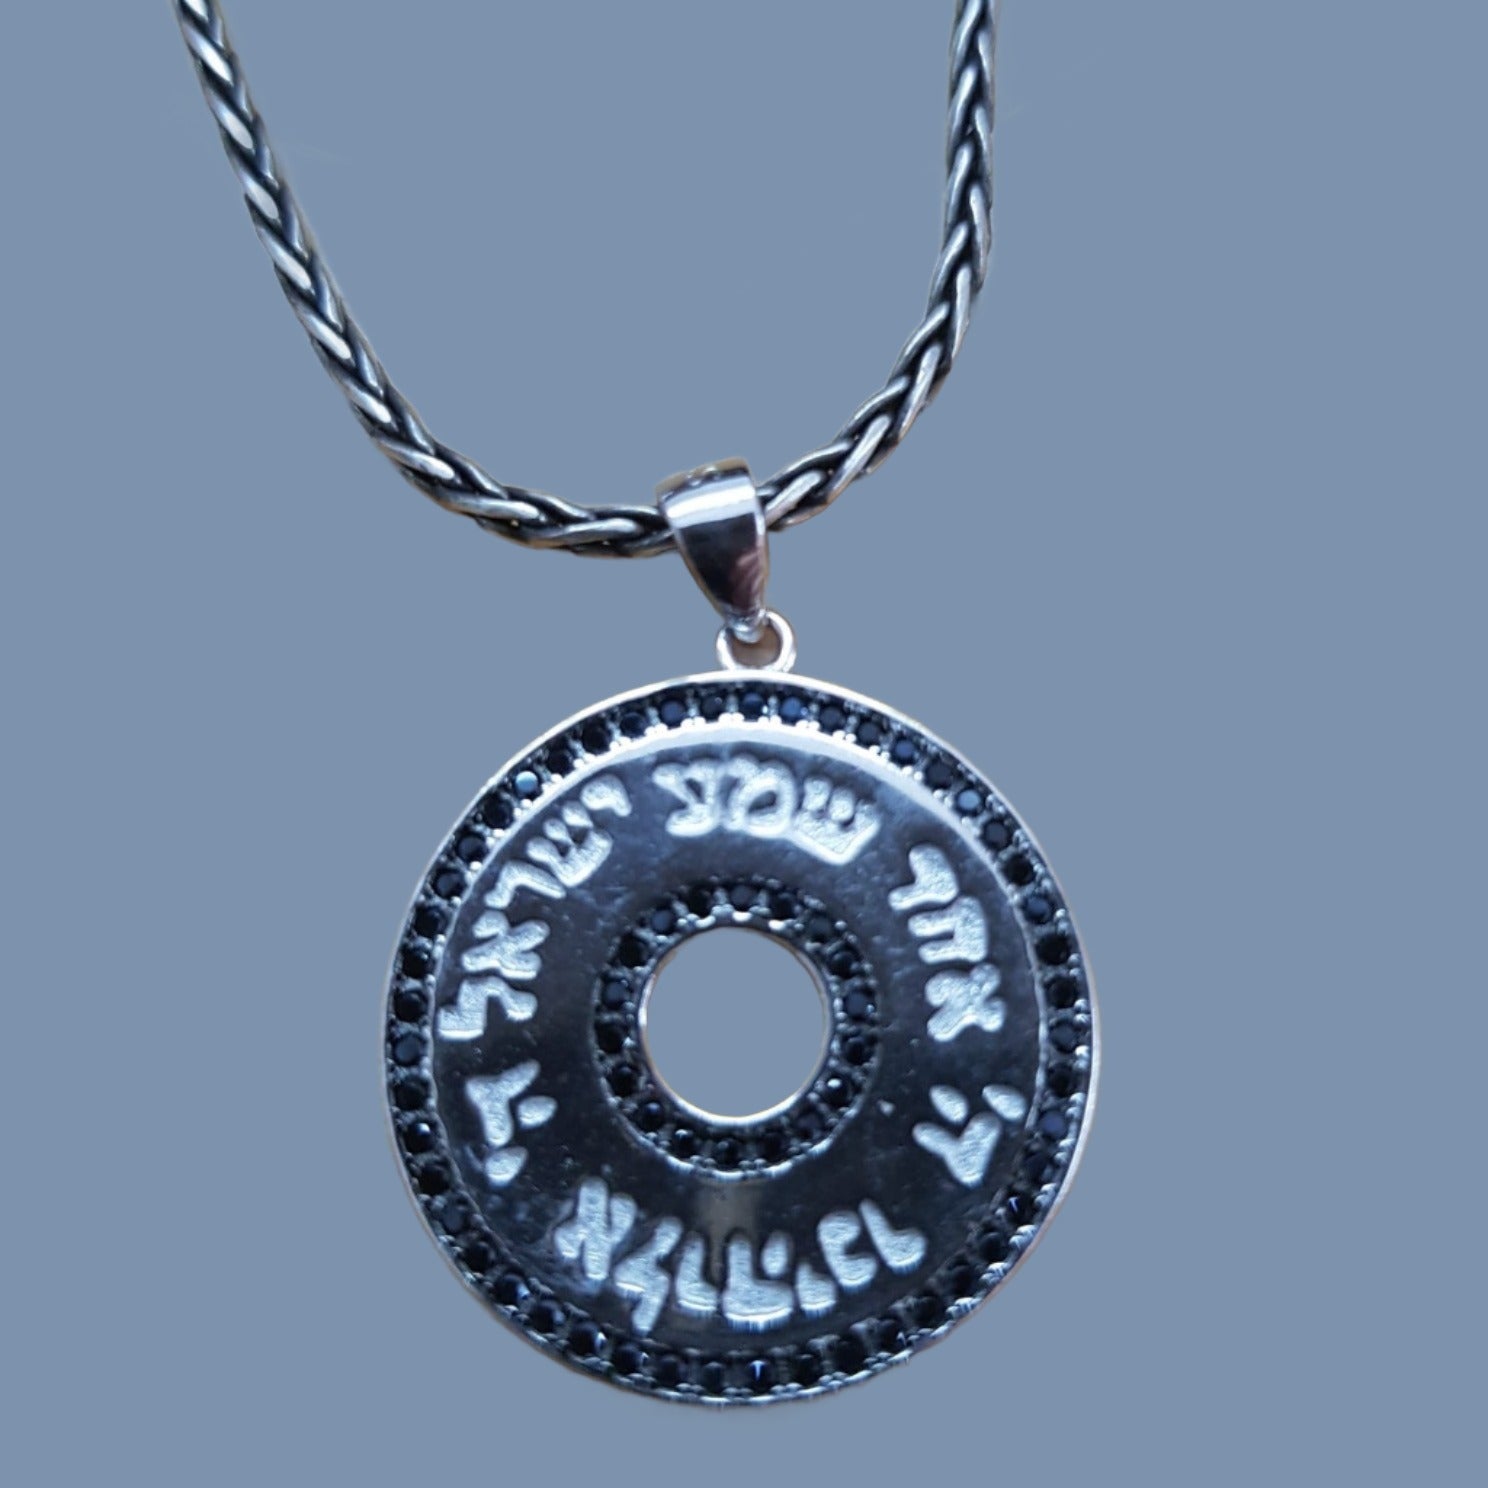 Bluenoemi Jewelry Necklaces Silver necklace Shma Israel pendant Symbol of Faith and Identity